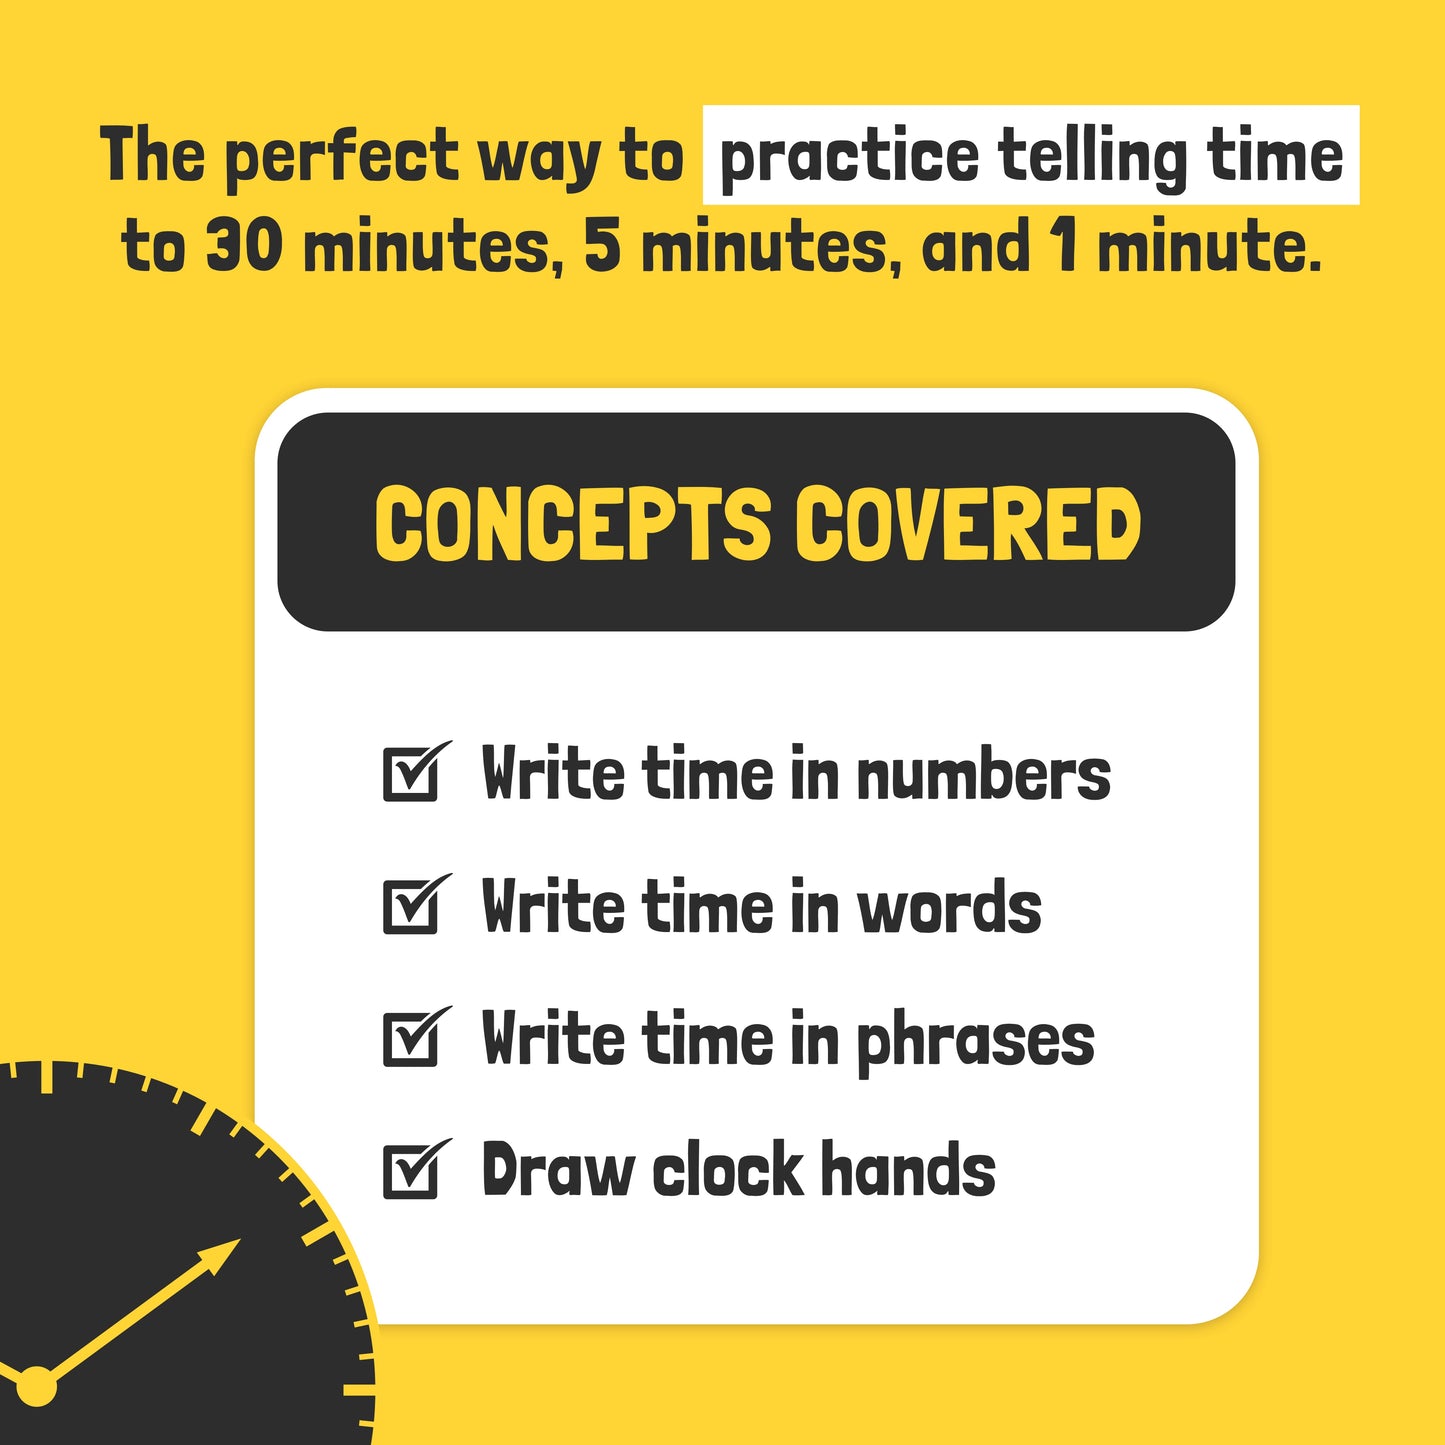 Practice telling time to 30, 5, and 1 minute